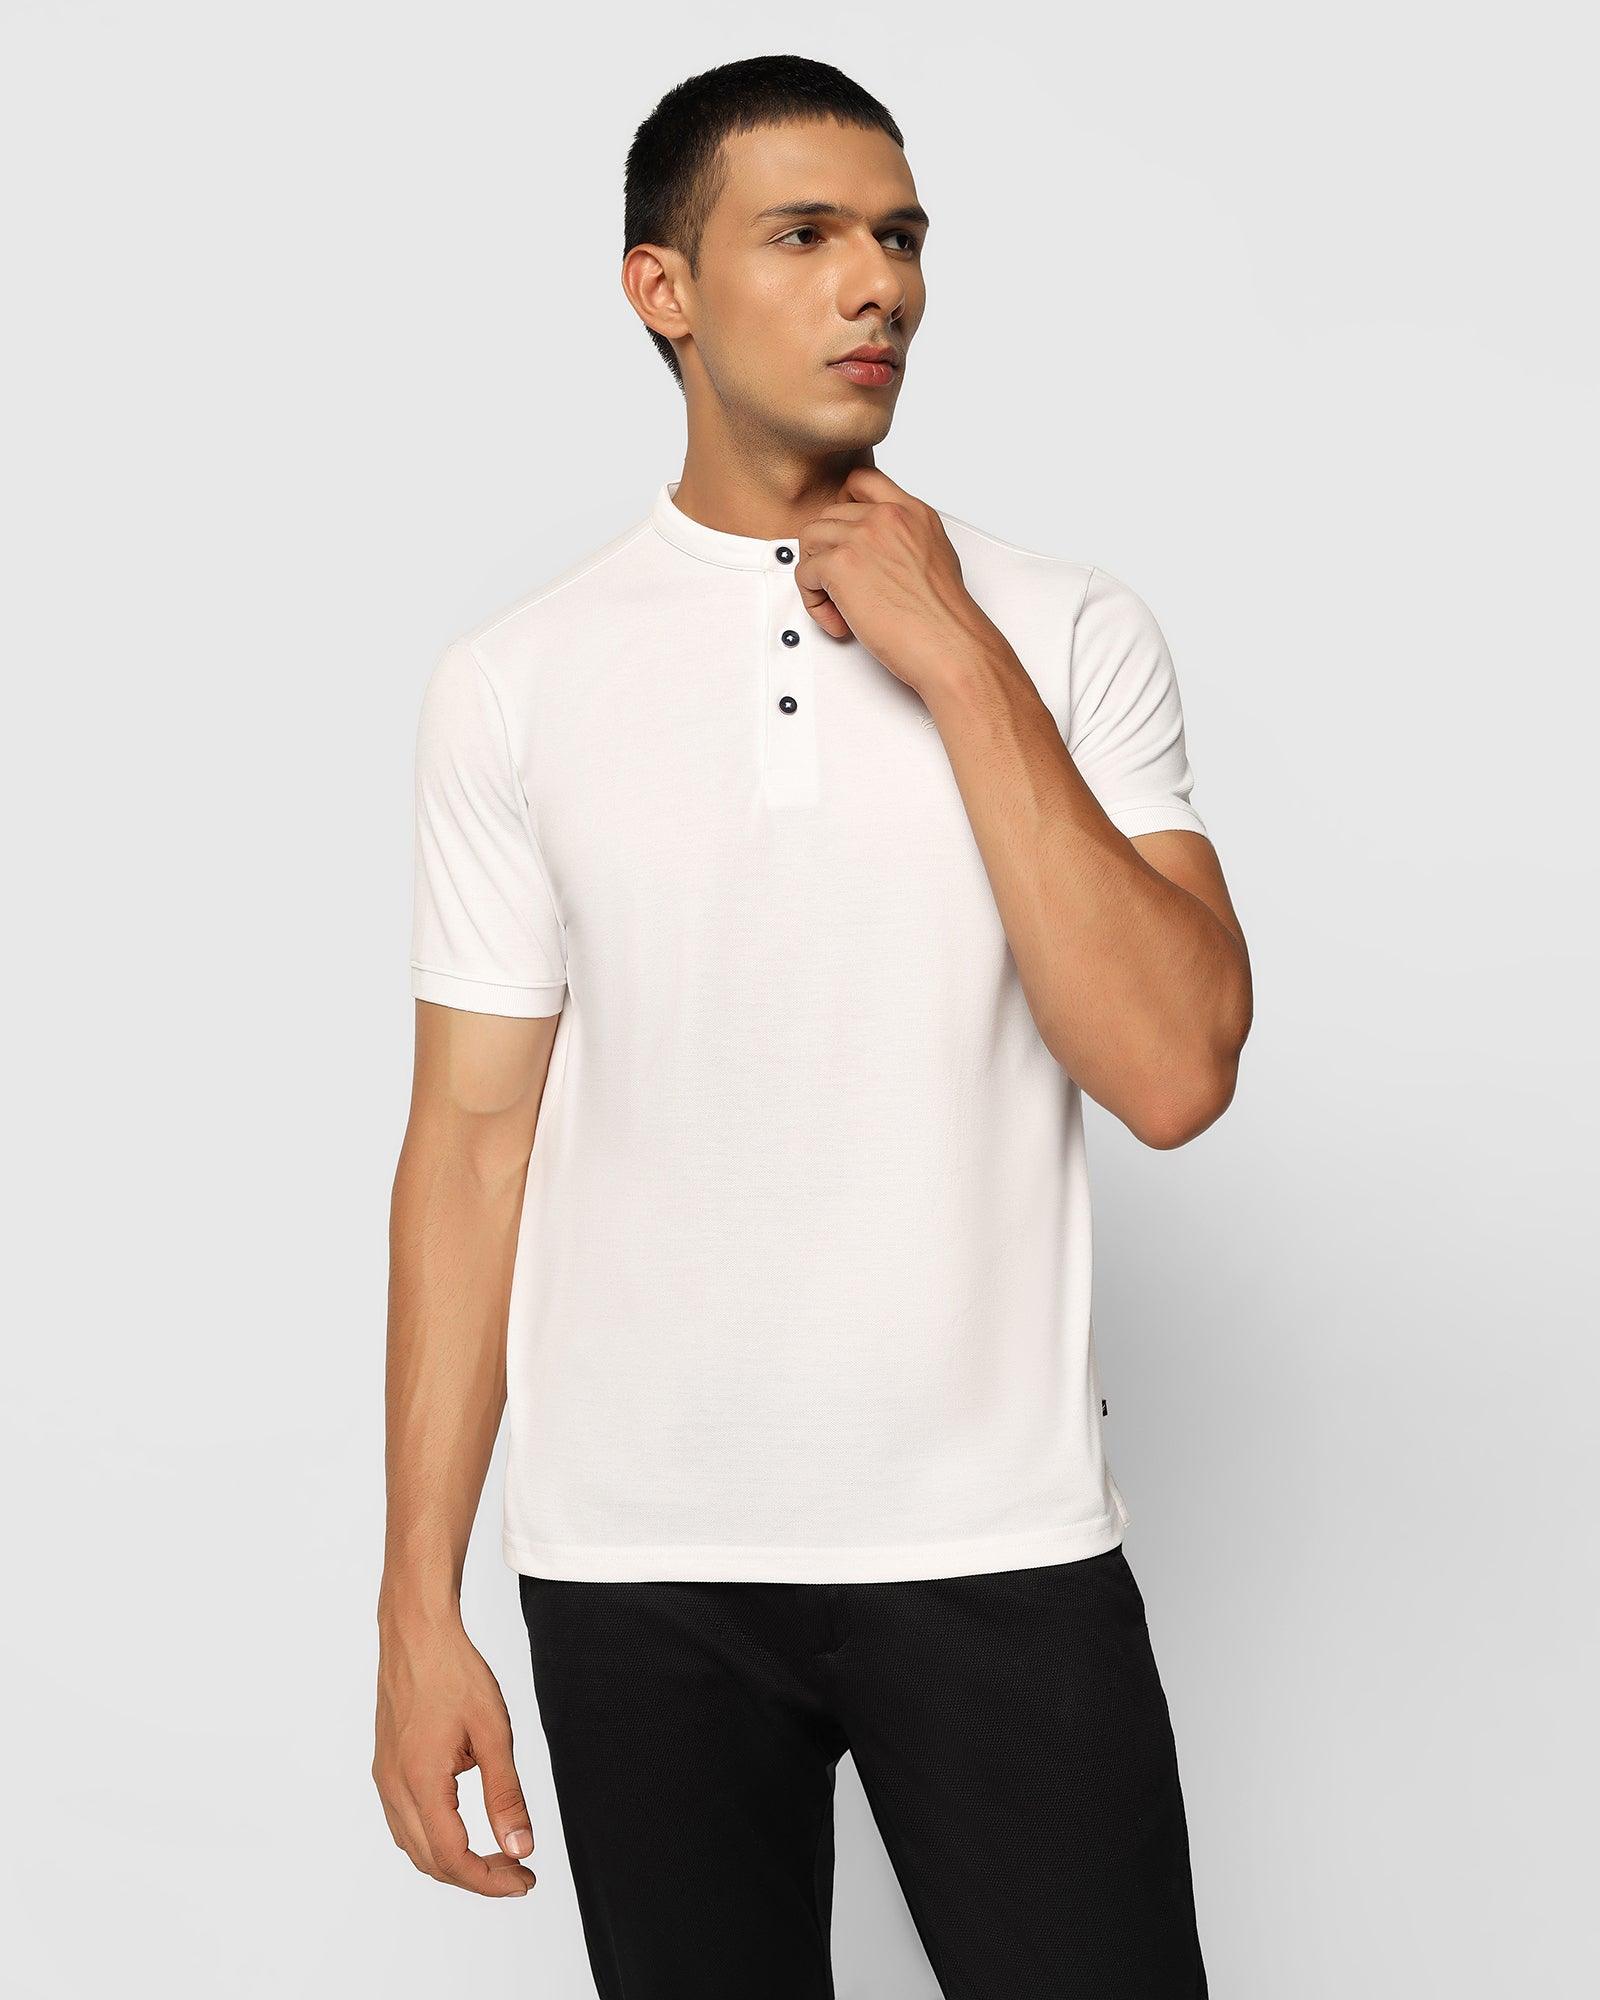 Polo White Solid T Shirt - Kell